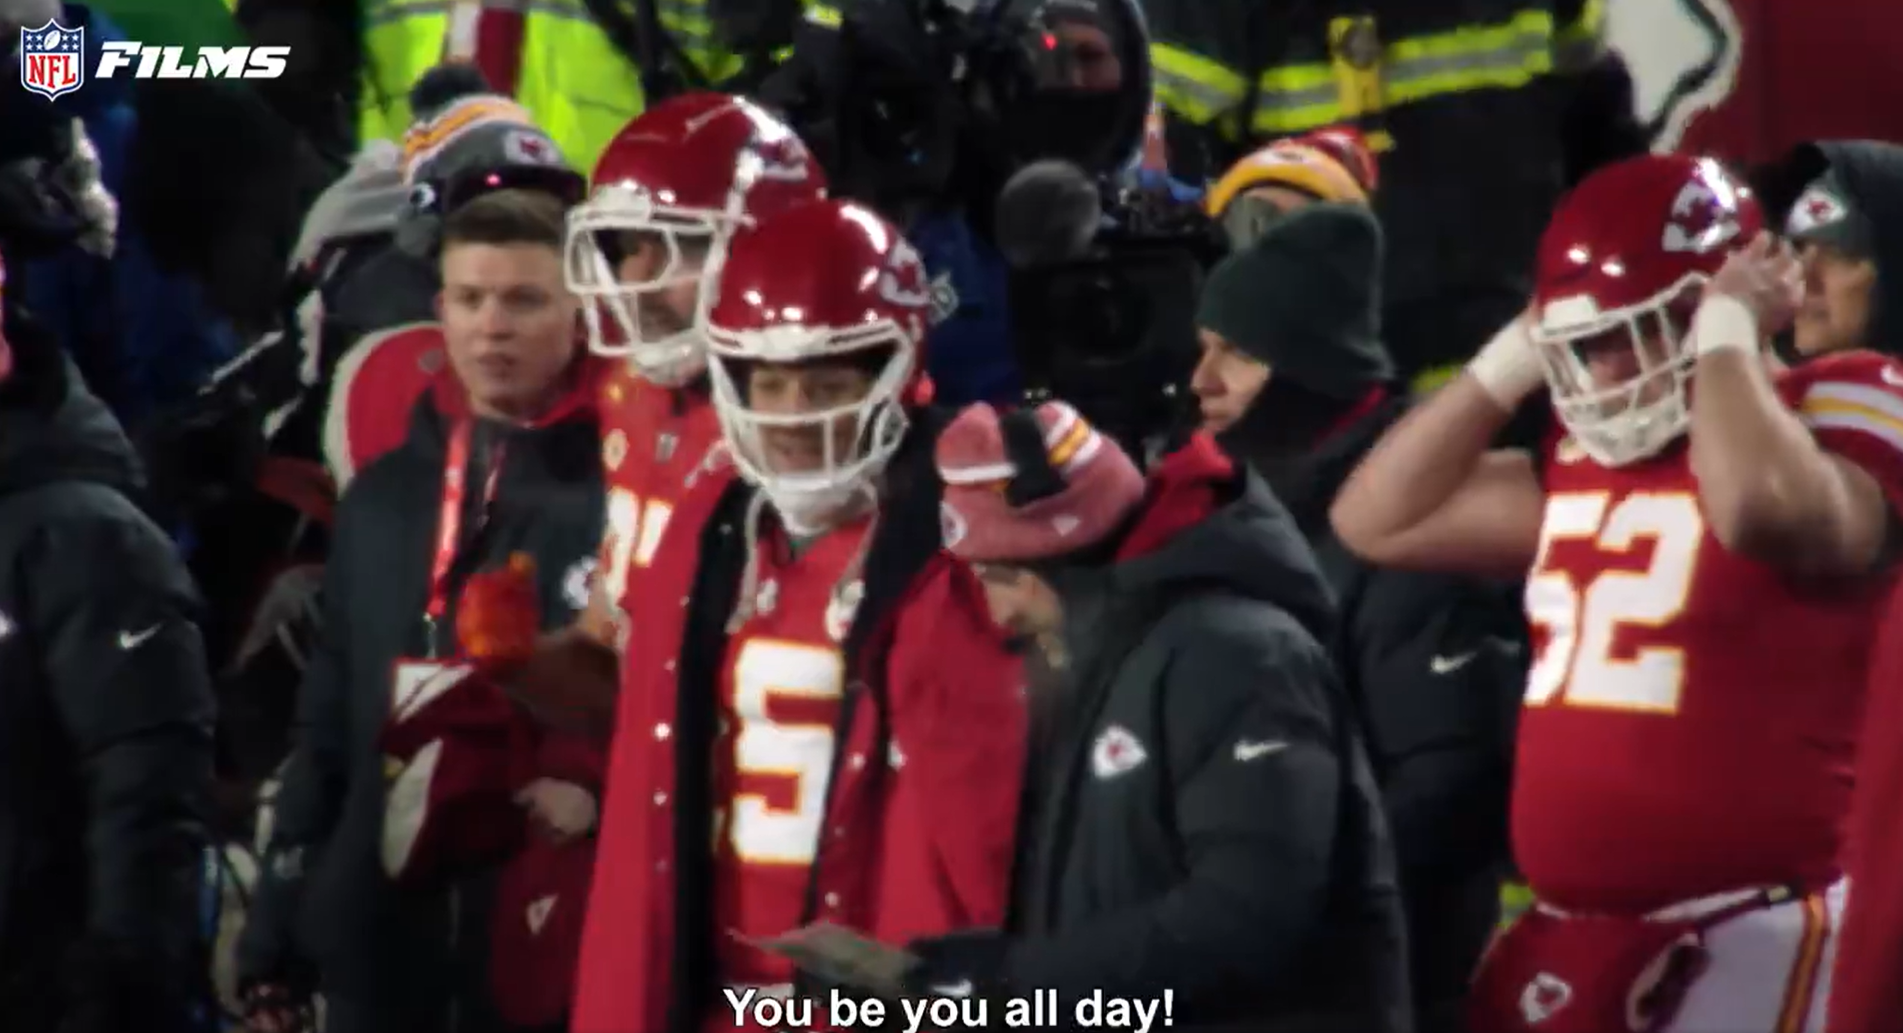 Mahokmes took Kelce's advice and ran with it en route to a third Super Bowl ring